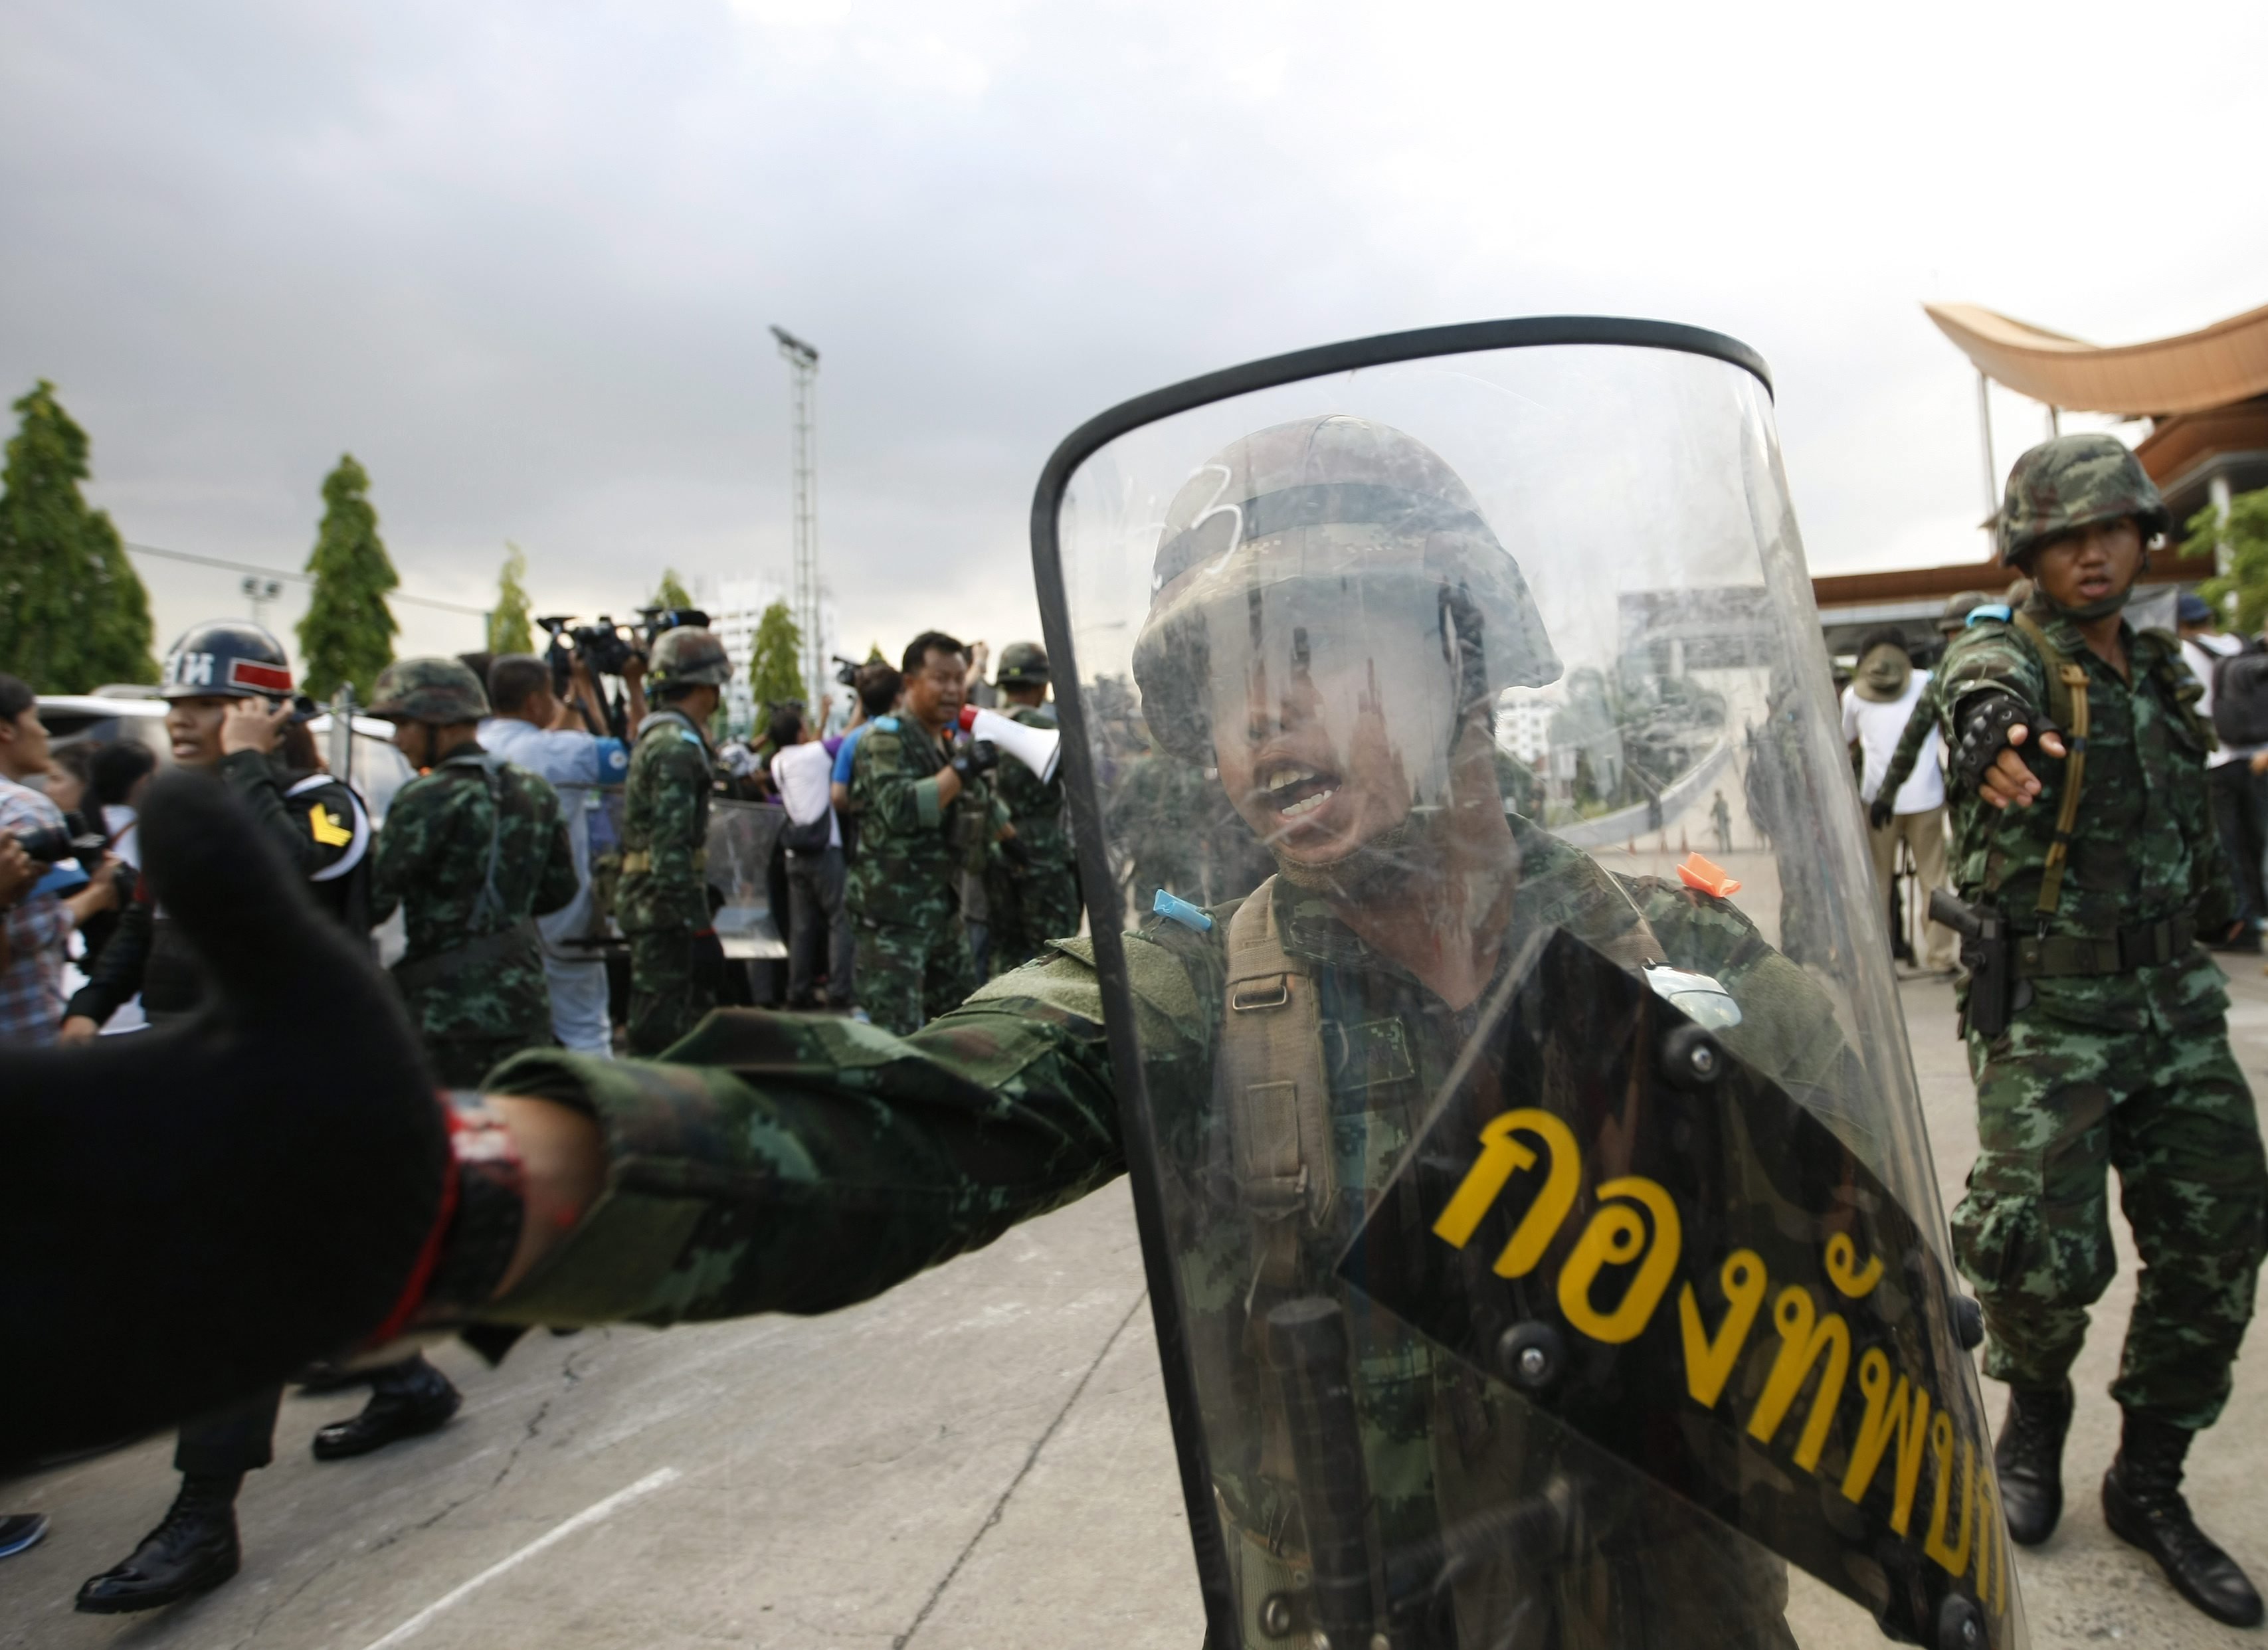 Thai armed soldiers stand guard after they used a military truck to block the entrance of the Army Club following a military coup in Bangkok on May 22, 2014. (Pongmanat Tasiri—EPA)